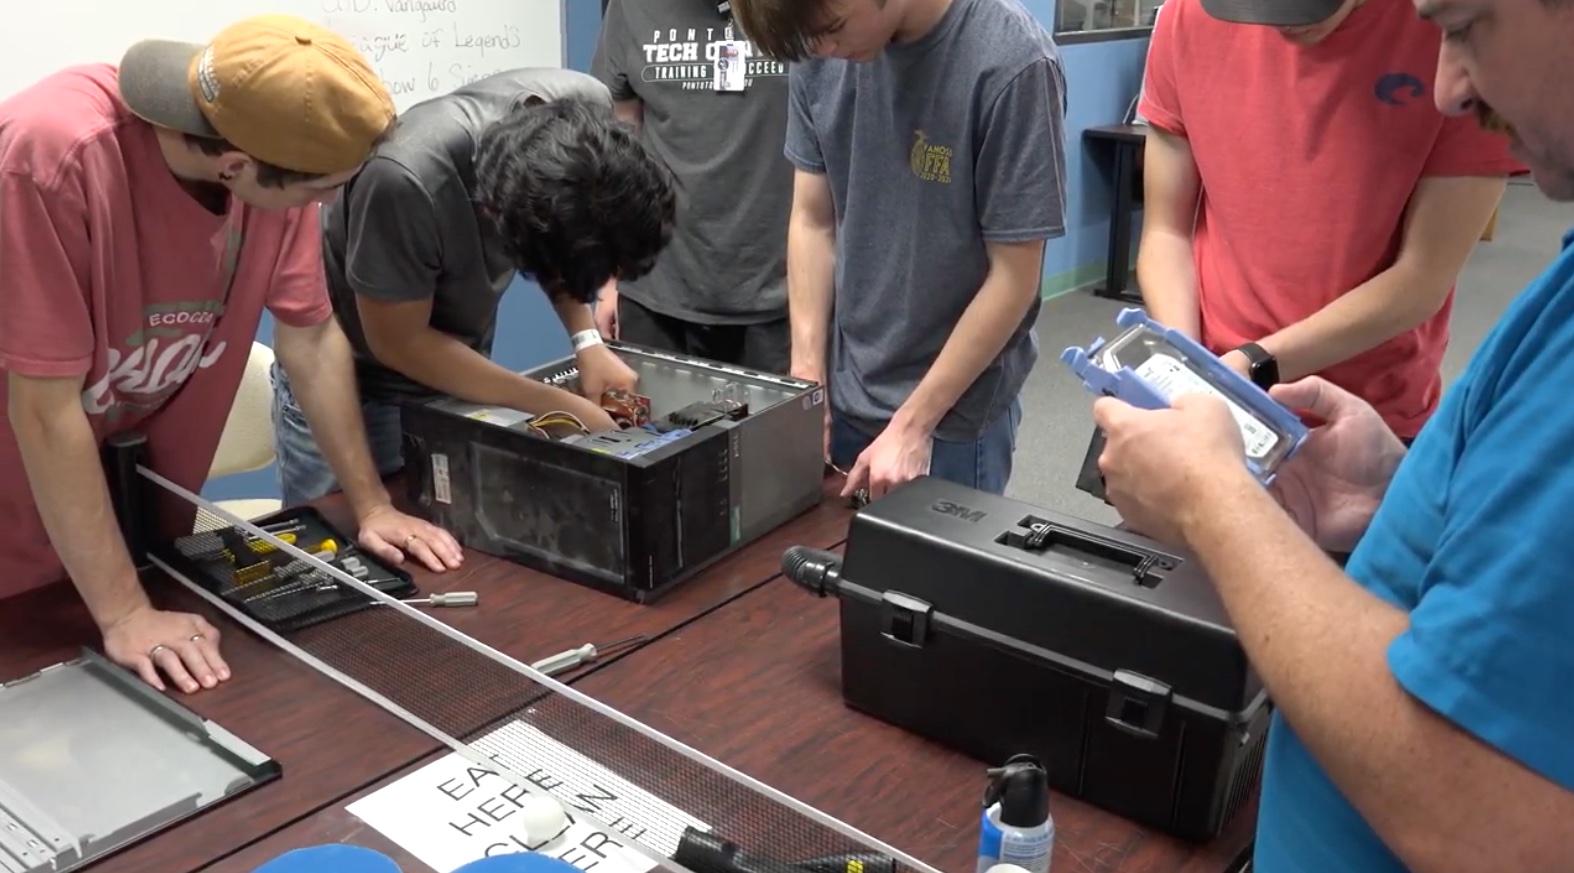 Students working on the inside of a computer